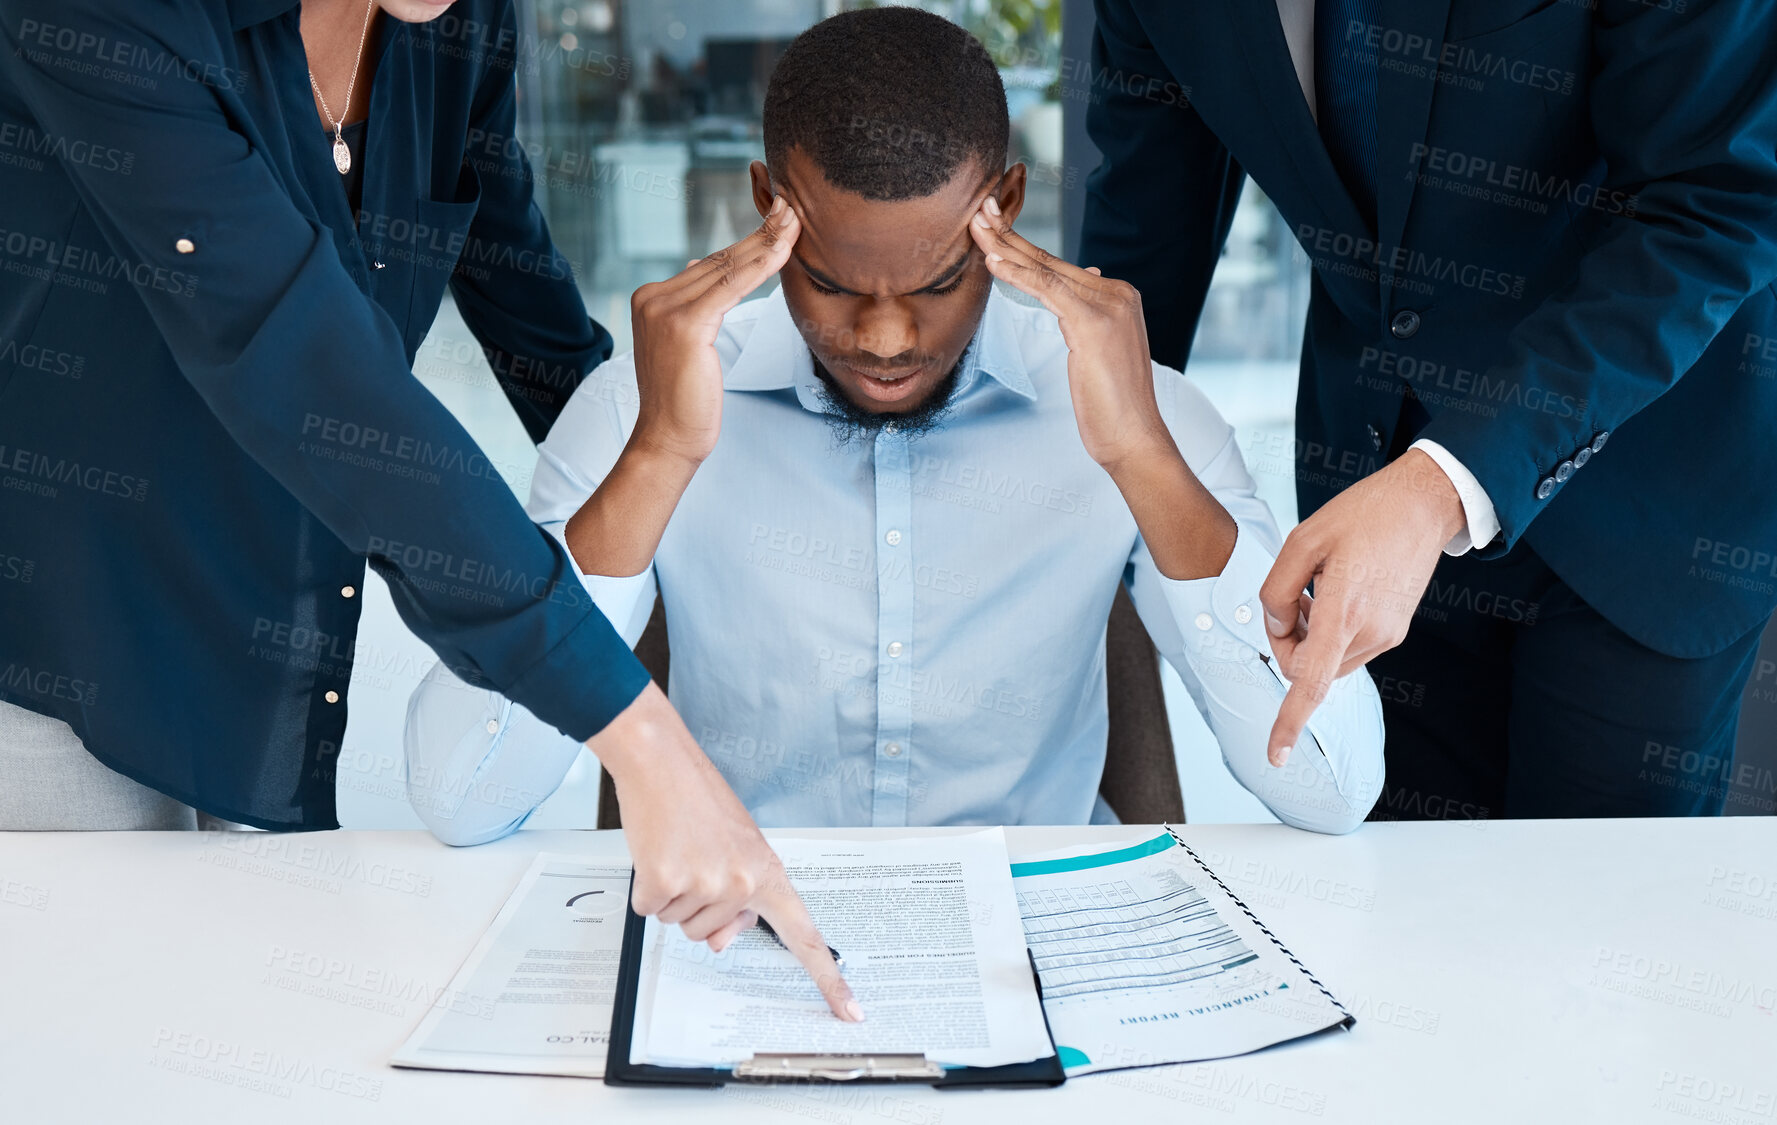 Buy stock photo Stress, overload and headache with businessman and burnout, overworked and pressure at corporate company. Frustrated, anxiety and mental health with black man overwhelmed with too much work